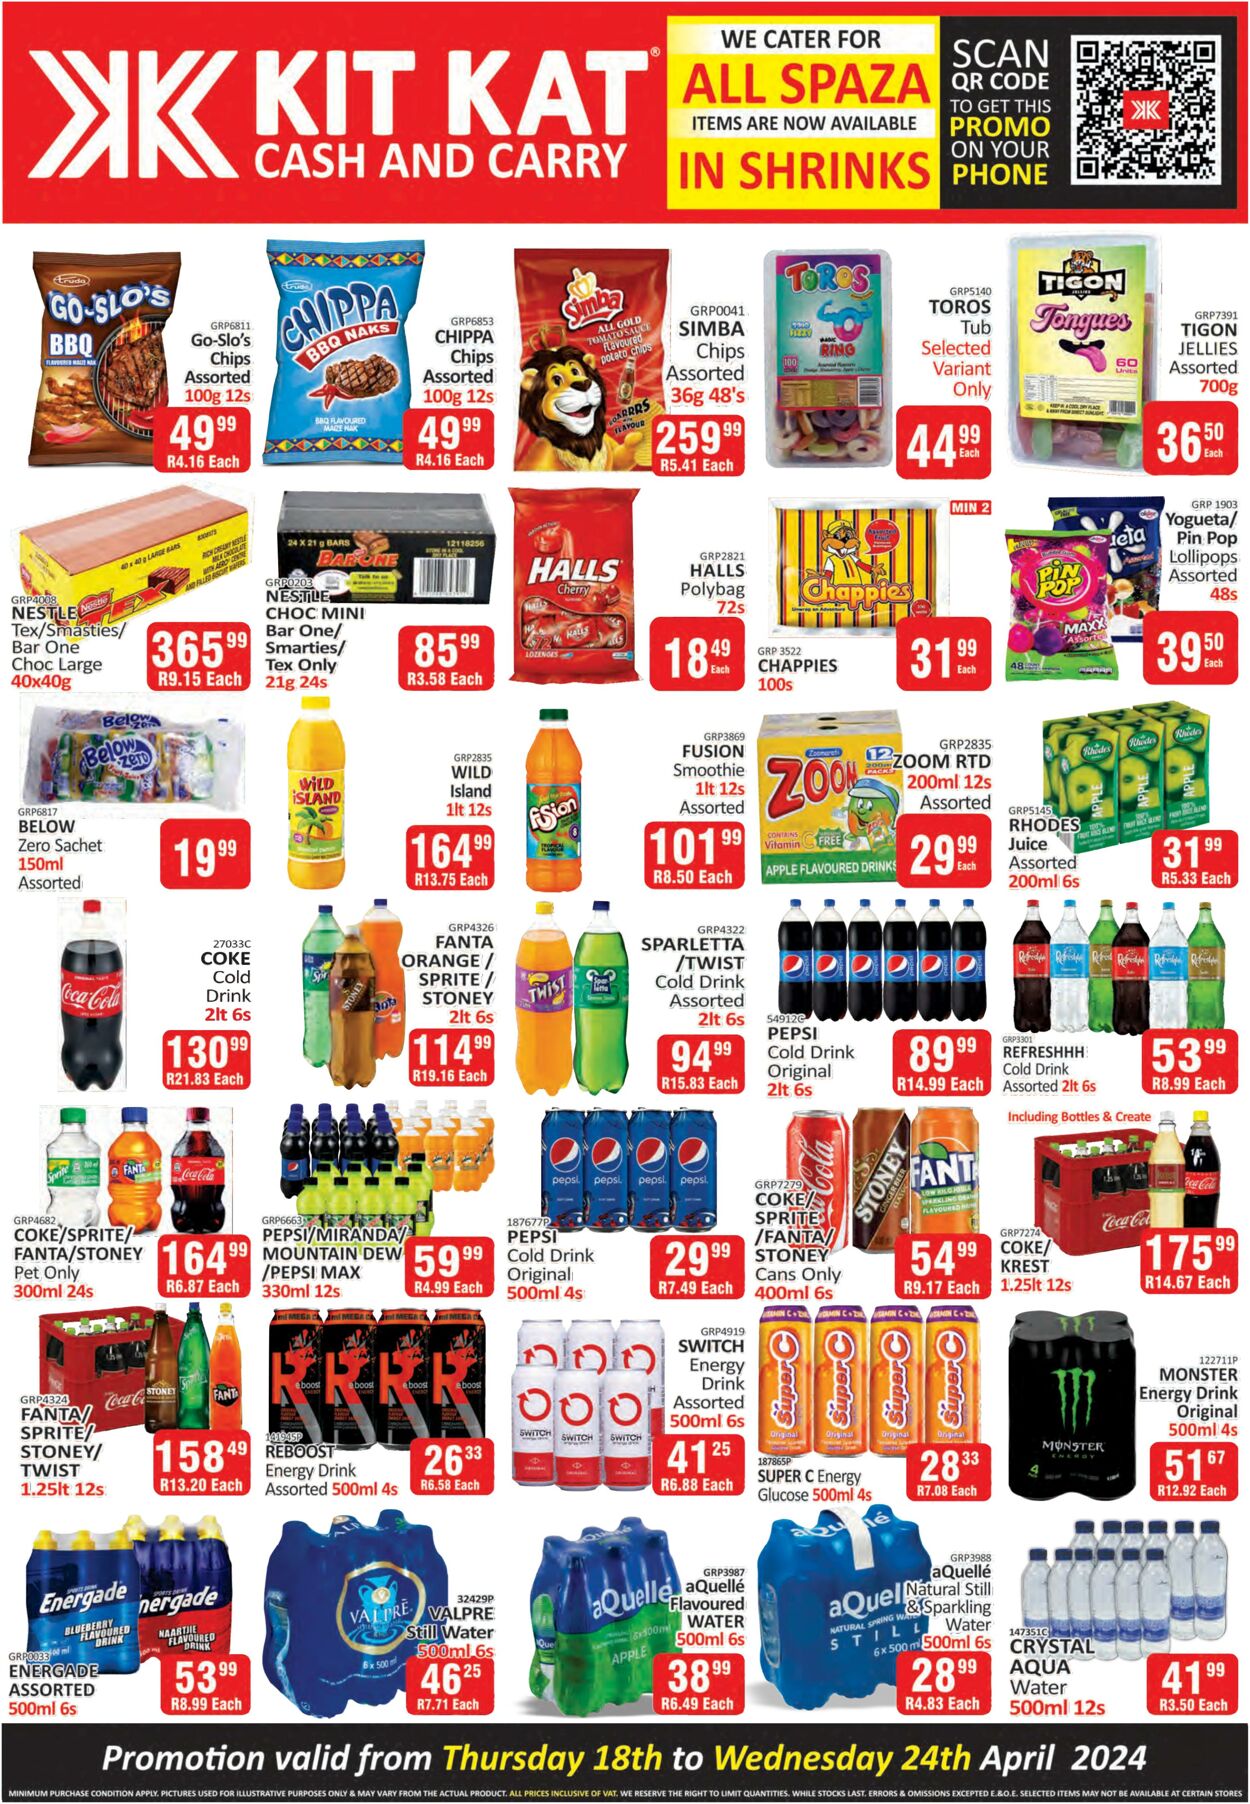 Special Kit Kat Cash and Carry 18.04.2024 - 24.04.2024